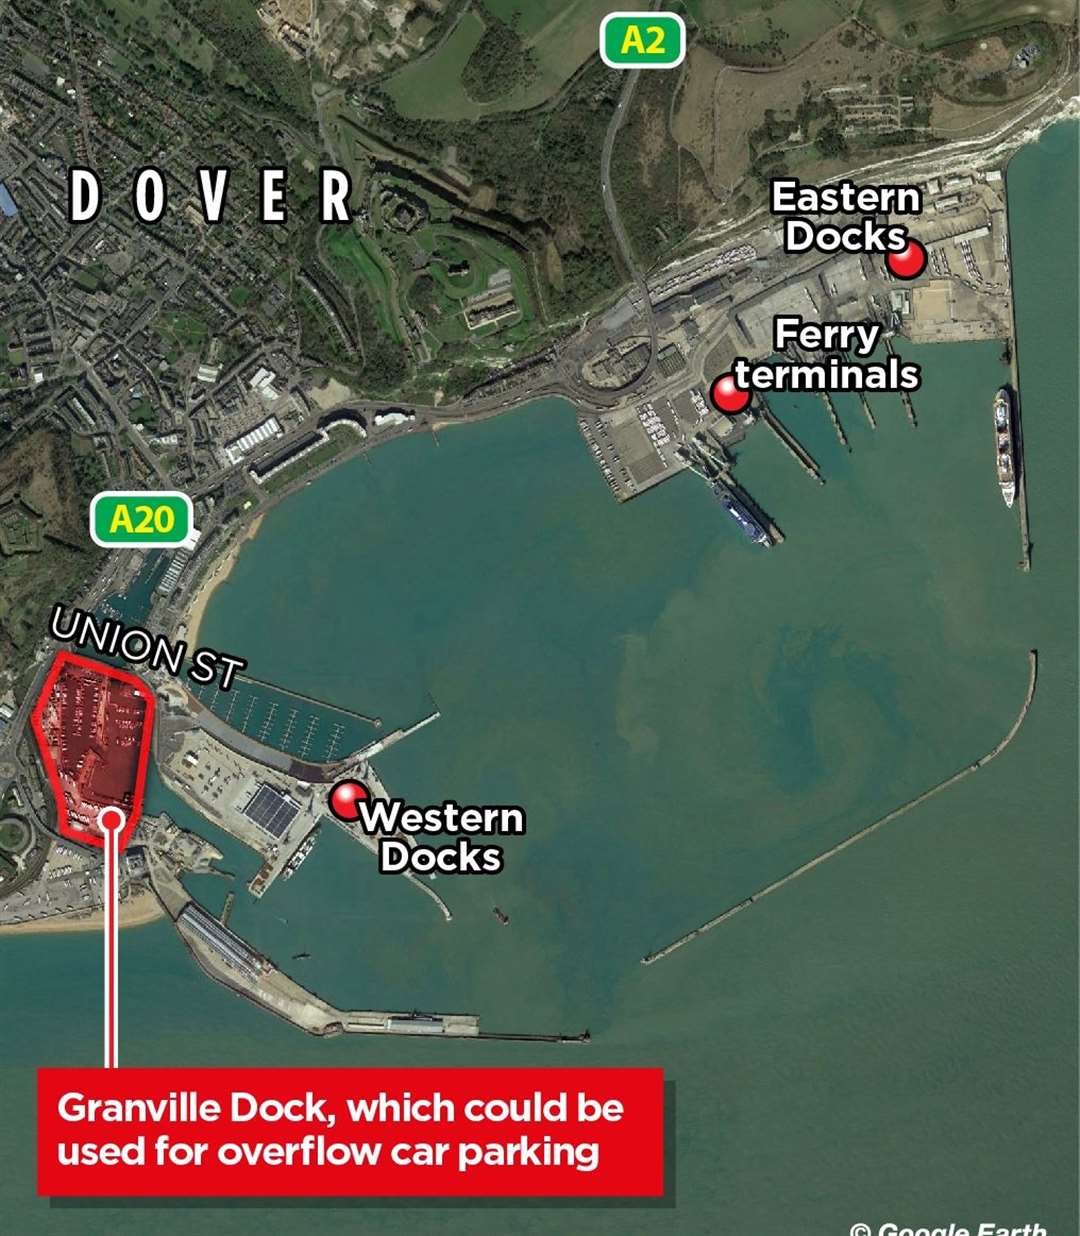 Granville Dock in relation to the wider Dover docks